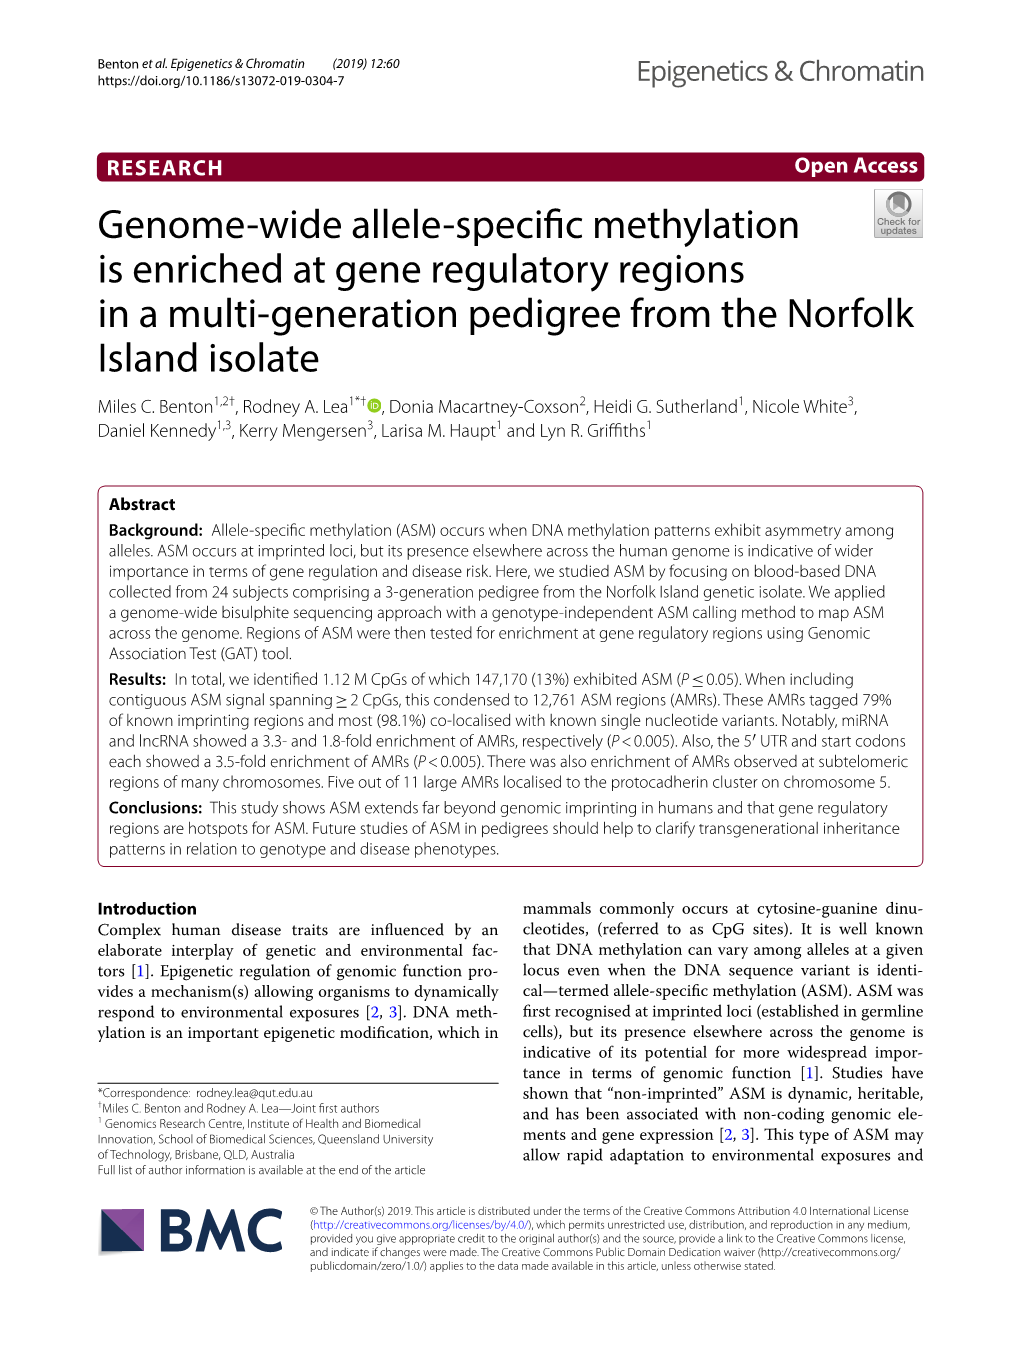 Genome-Wide Allele-Specific Methylation Is Enriched at Gene